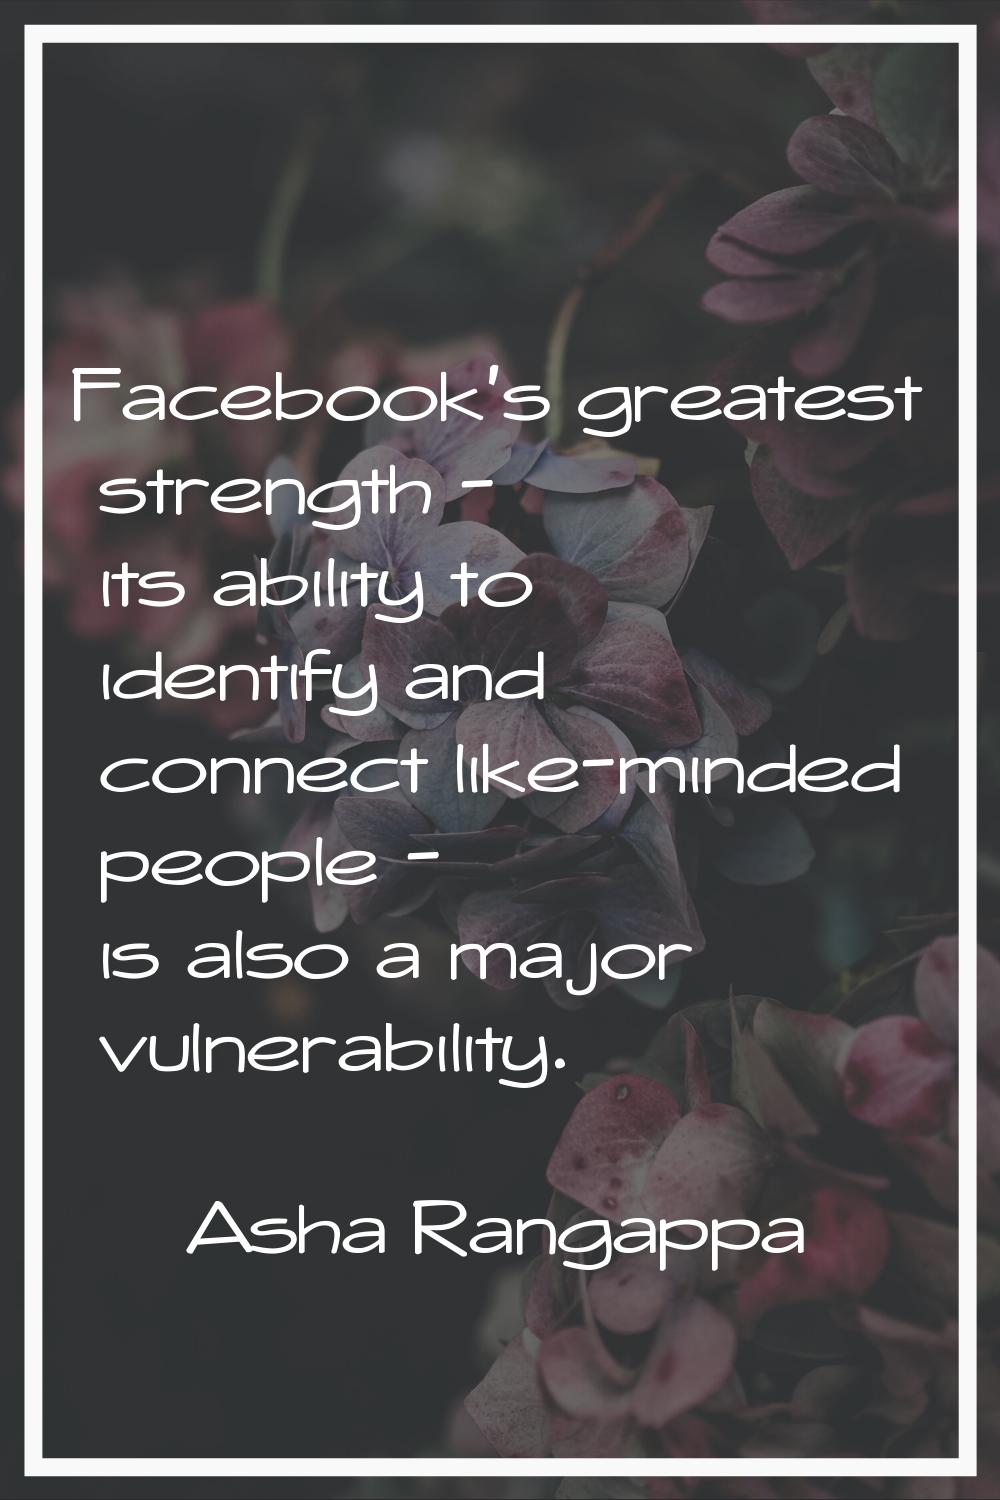 Facebook’s greatest strength - its ability to identify and connect like-minded people - is also a m